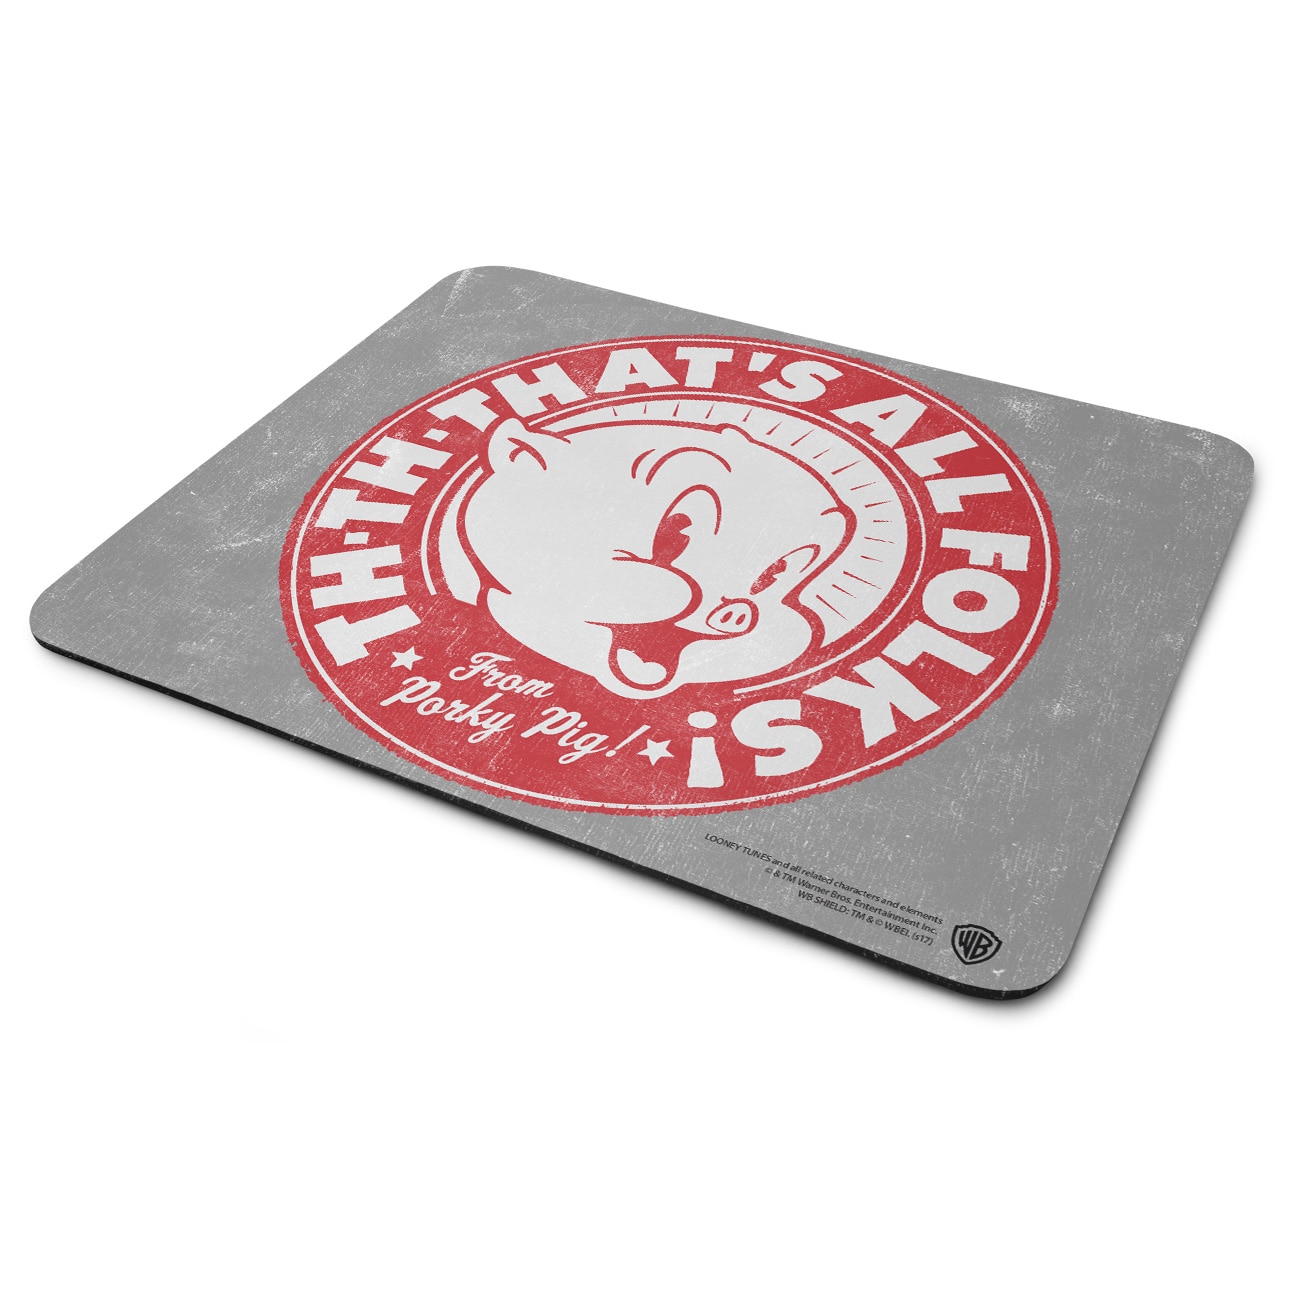 Porky Pig - That's All Folks! Mouse Pad 3-Pack